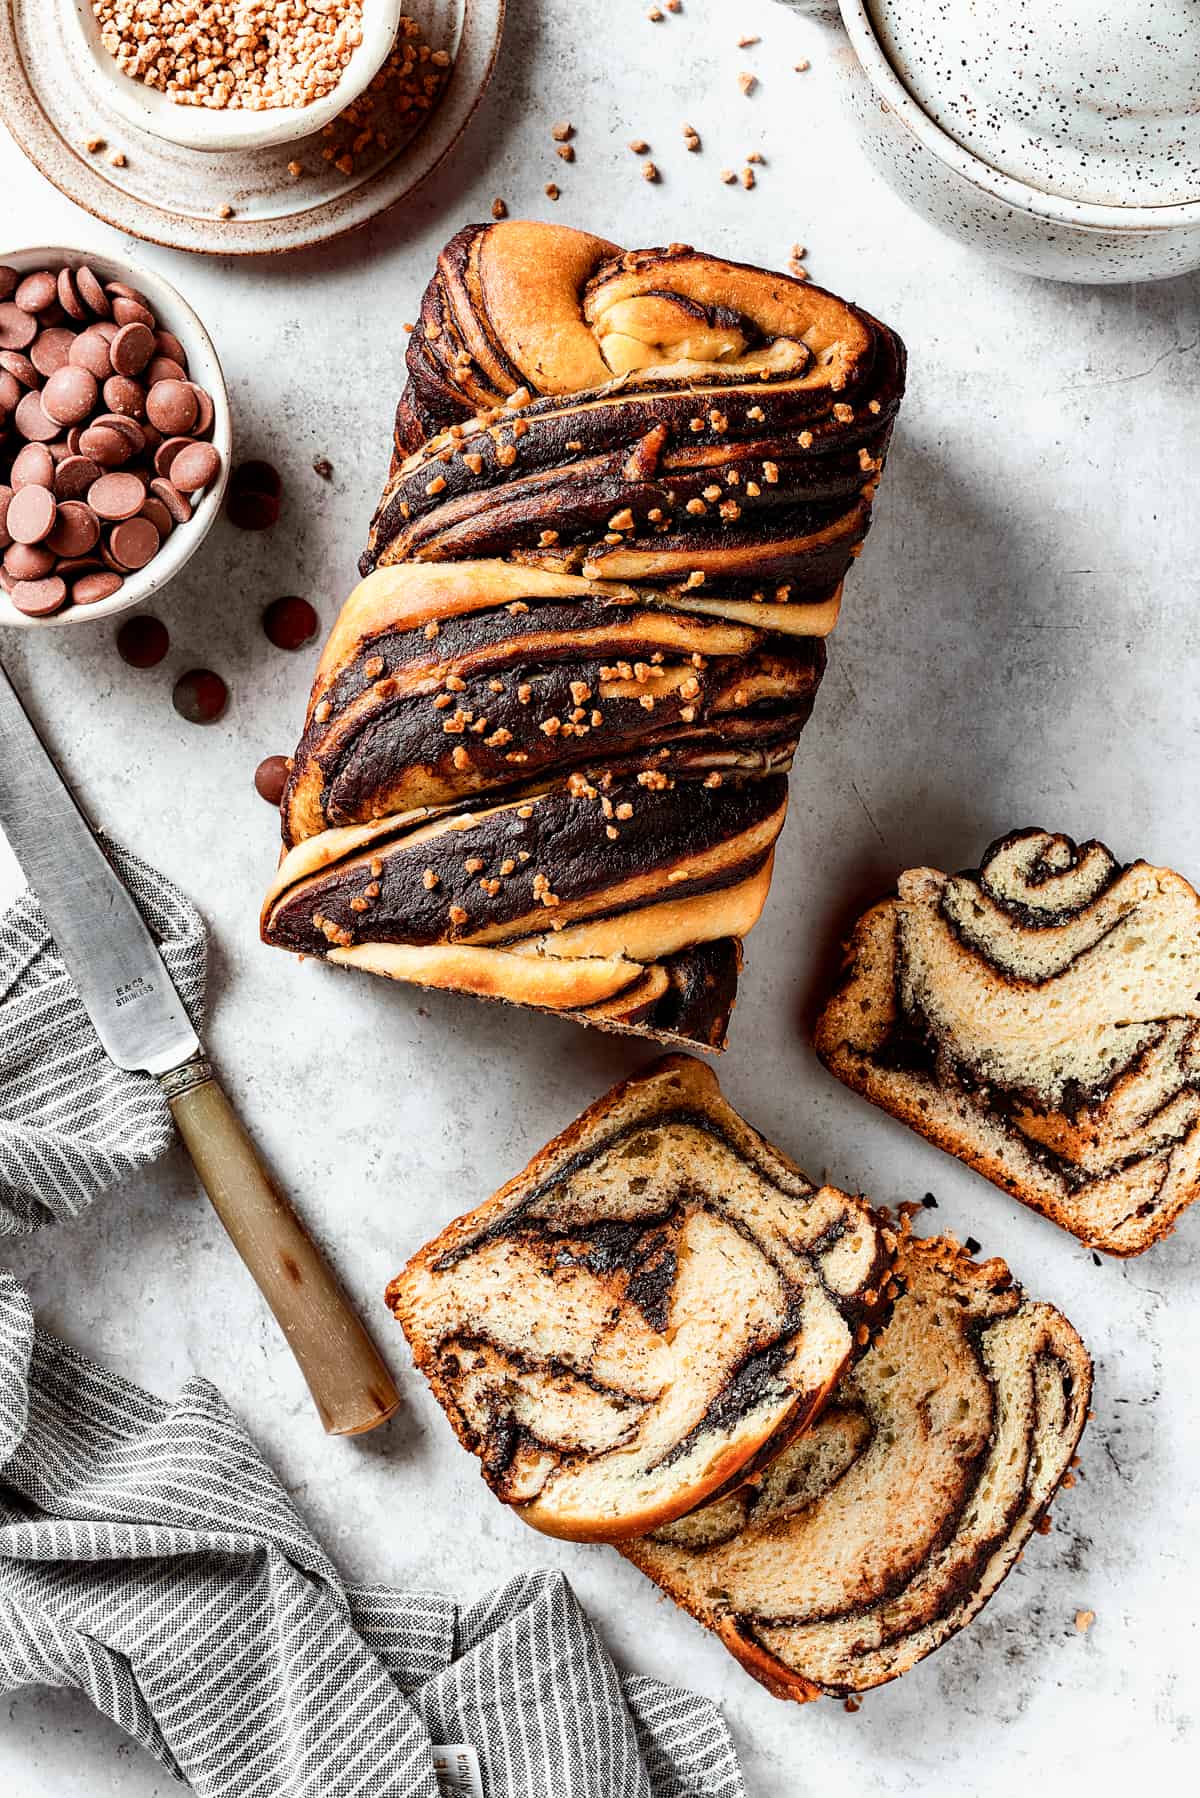 A loaf of chocolate babka that has been partially sliced. The slices are laid out on the work surface along with a bread knife and a dish of chocolate chips.